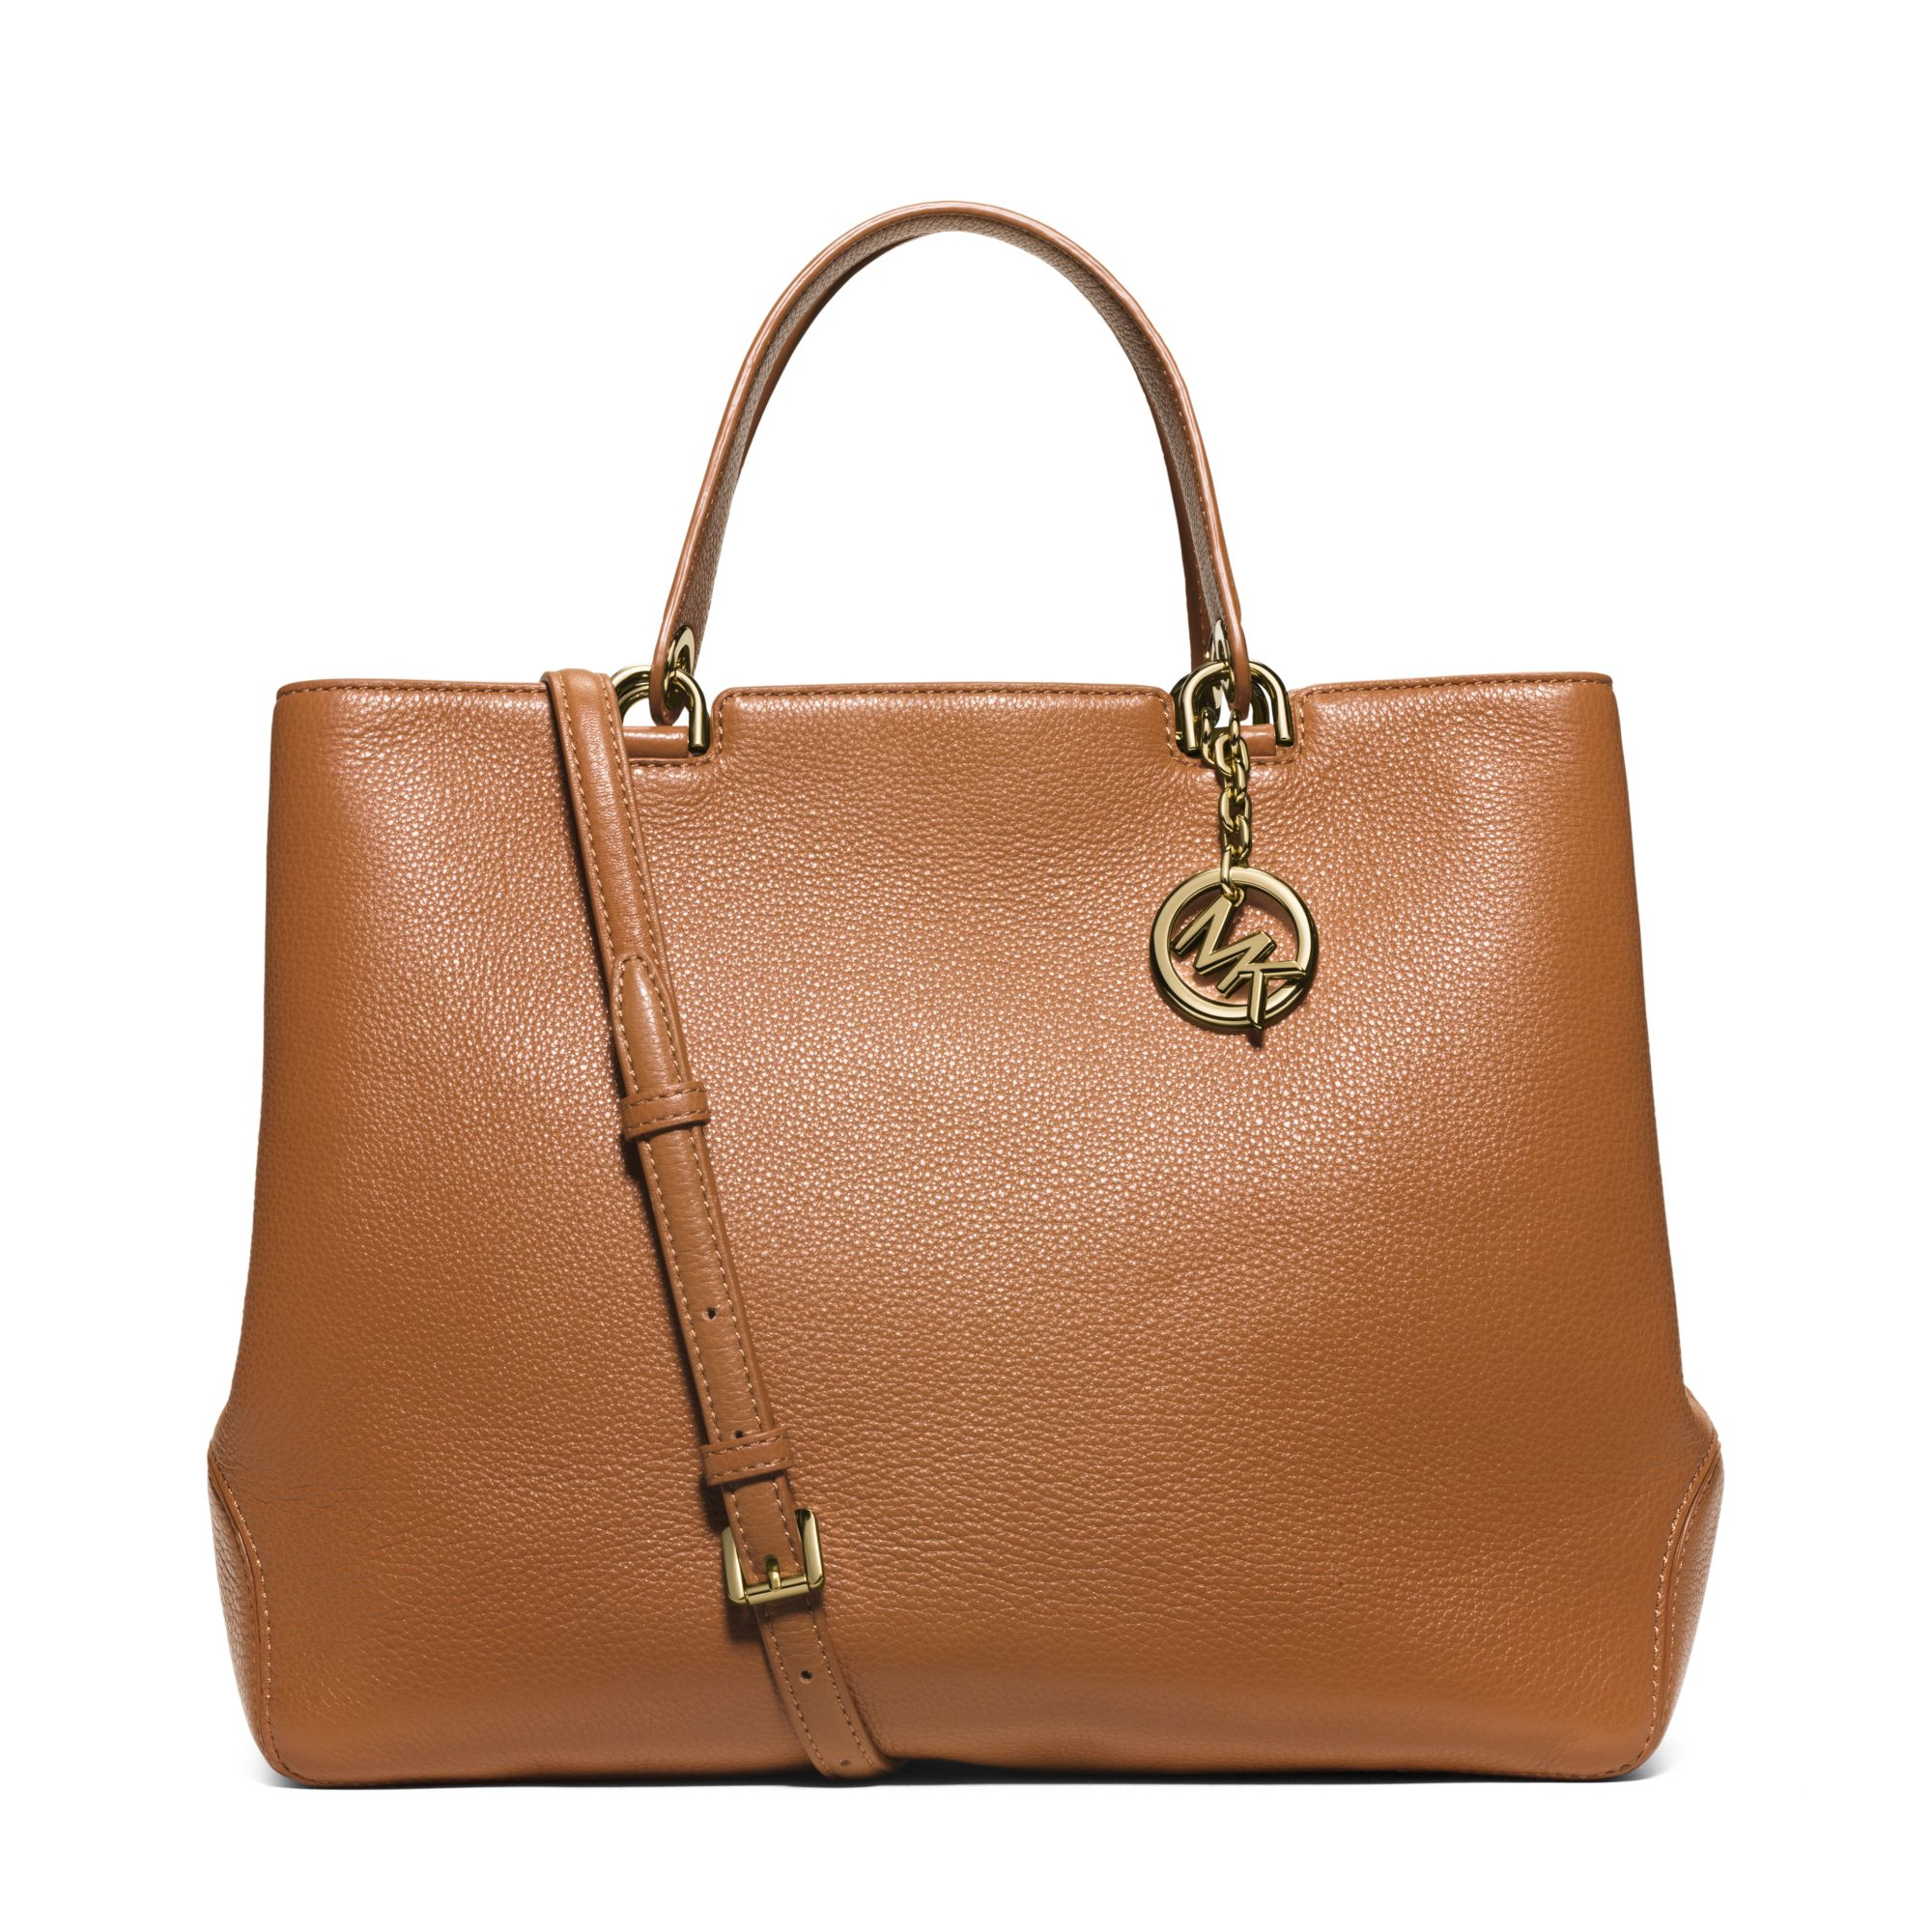 Michael kors Anabelle Extra-large Leather Tote in Brown | Lyst